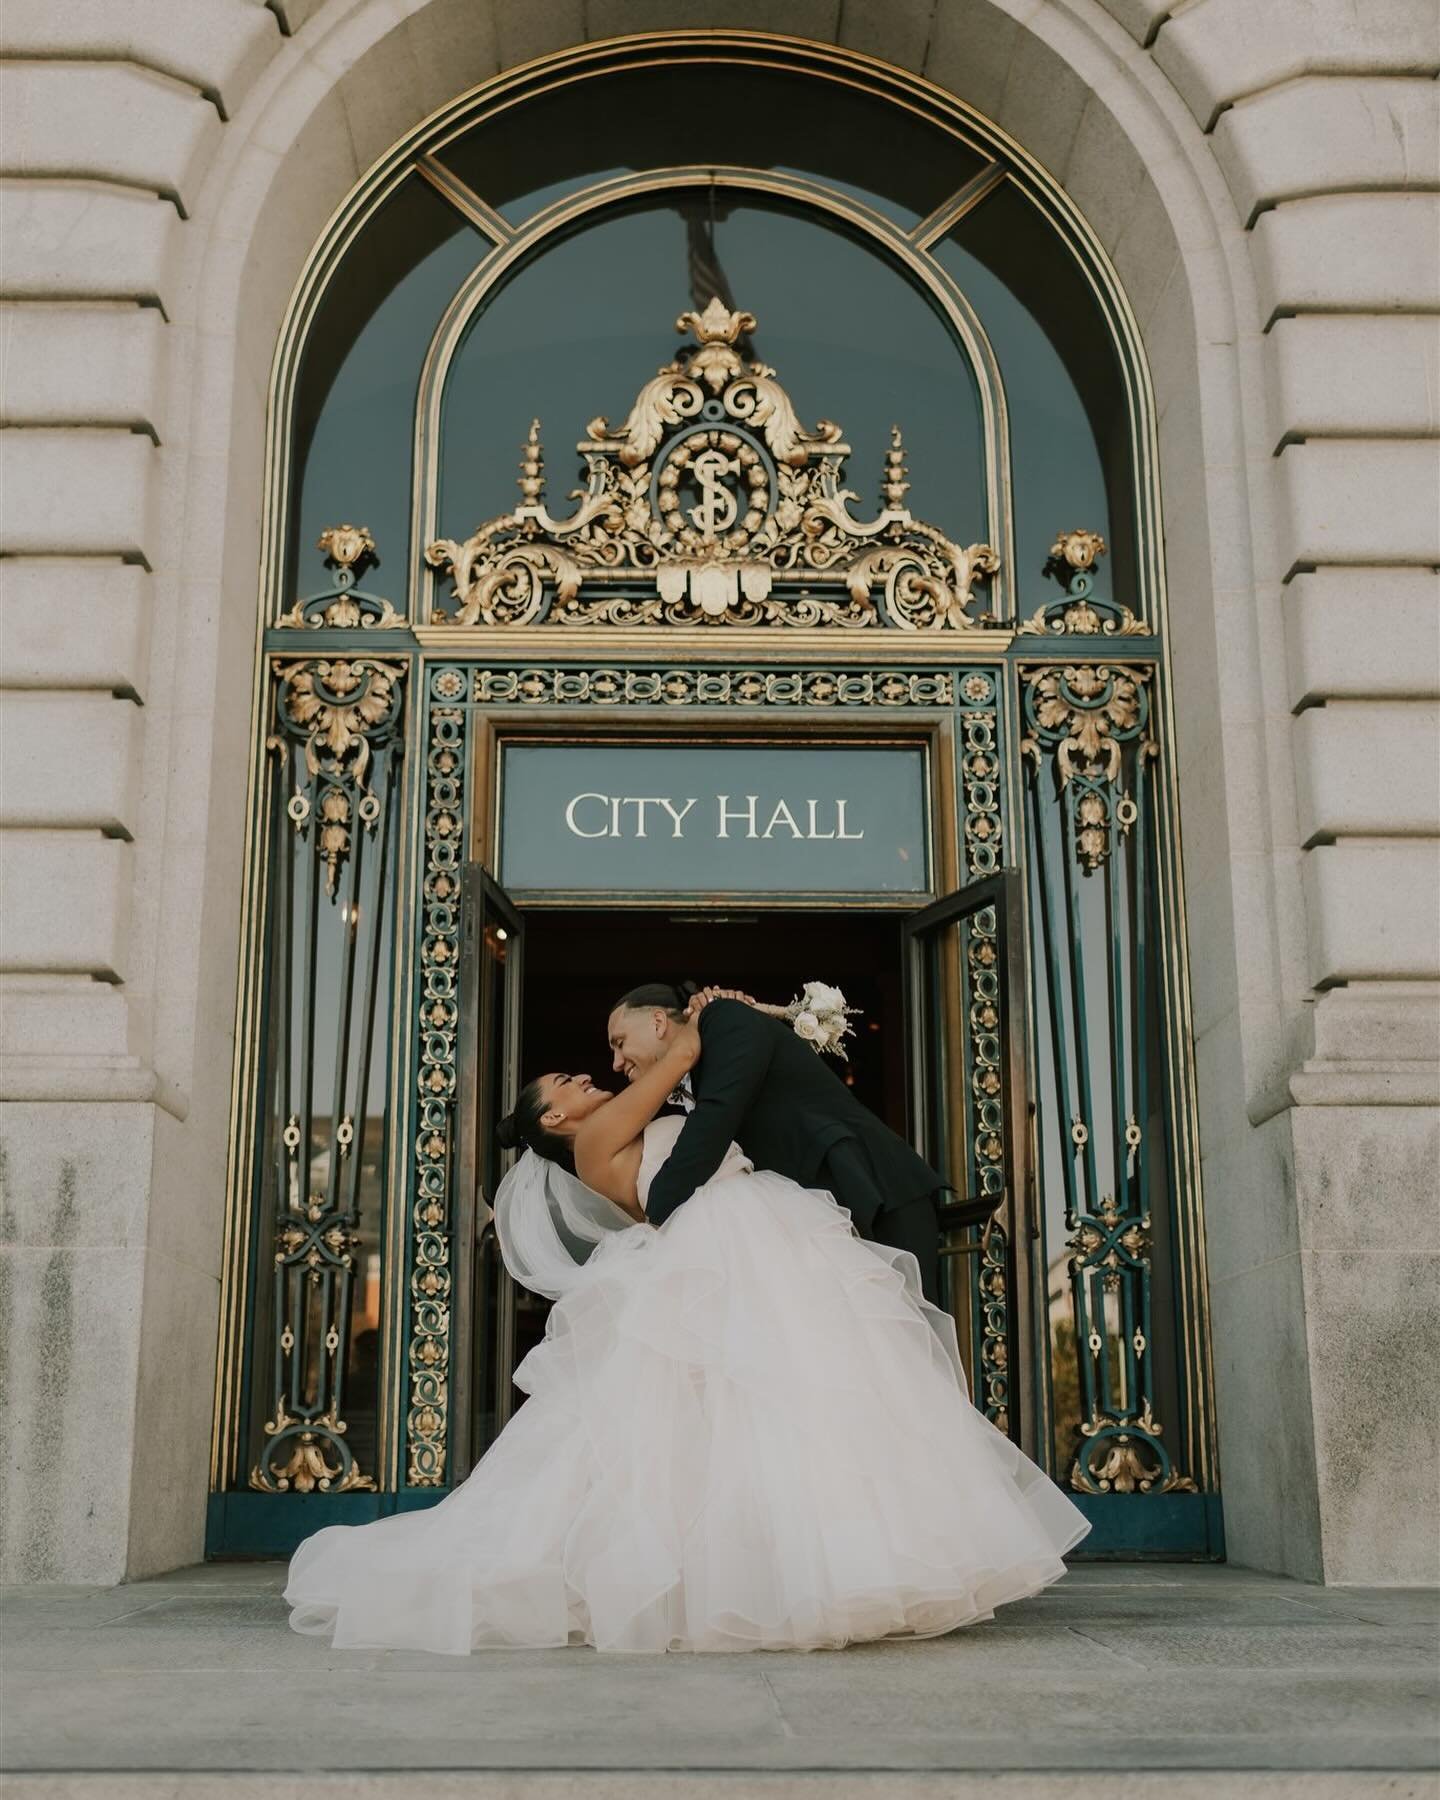 Forever in love with City Hall weddings 🤍
-
#cityhall #cityhallwedding #cityhallsanfrancisco #cityhallsf #sanfrancisco #sanfranciscocityhallwedding #sanfranciscoweddingphotographer #bayareababyphotographer